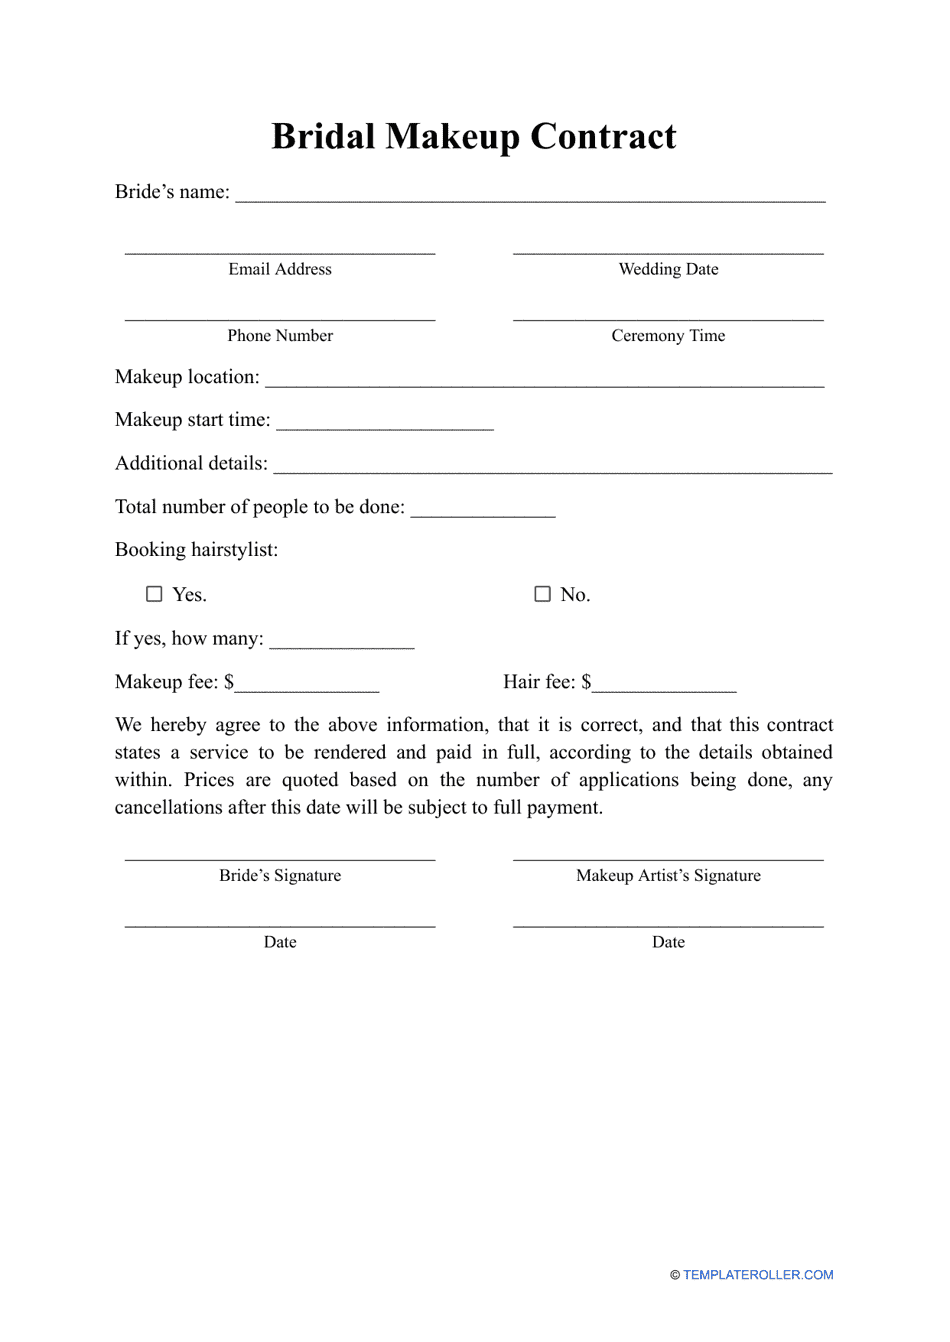 Bridal Makeup Contract Template, Page 1